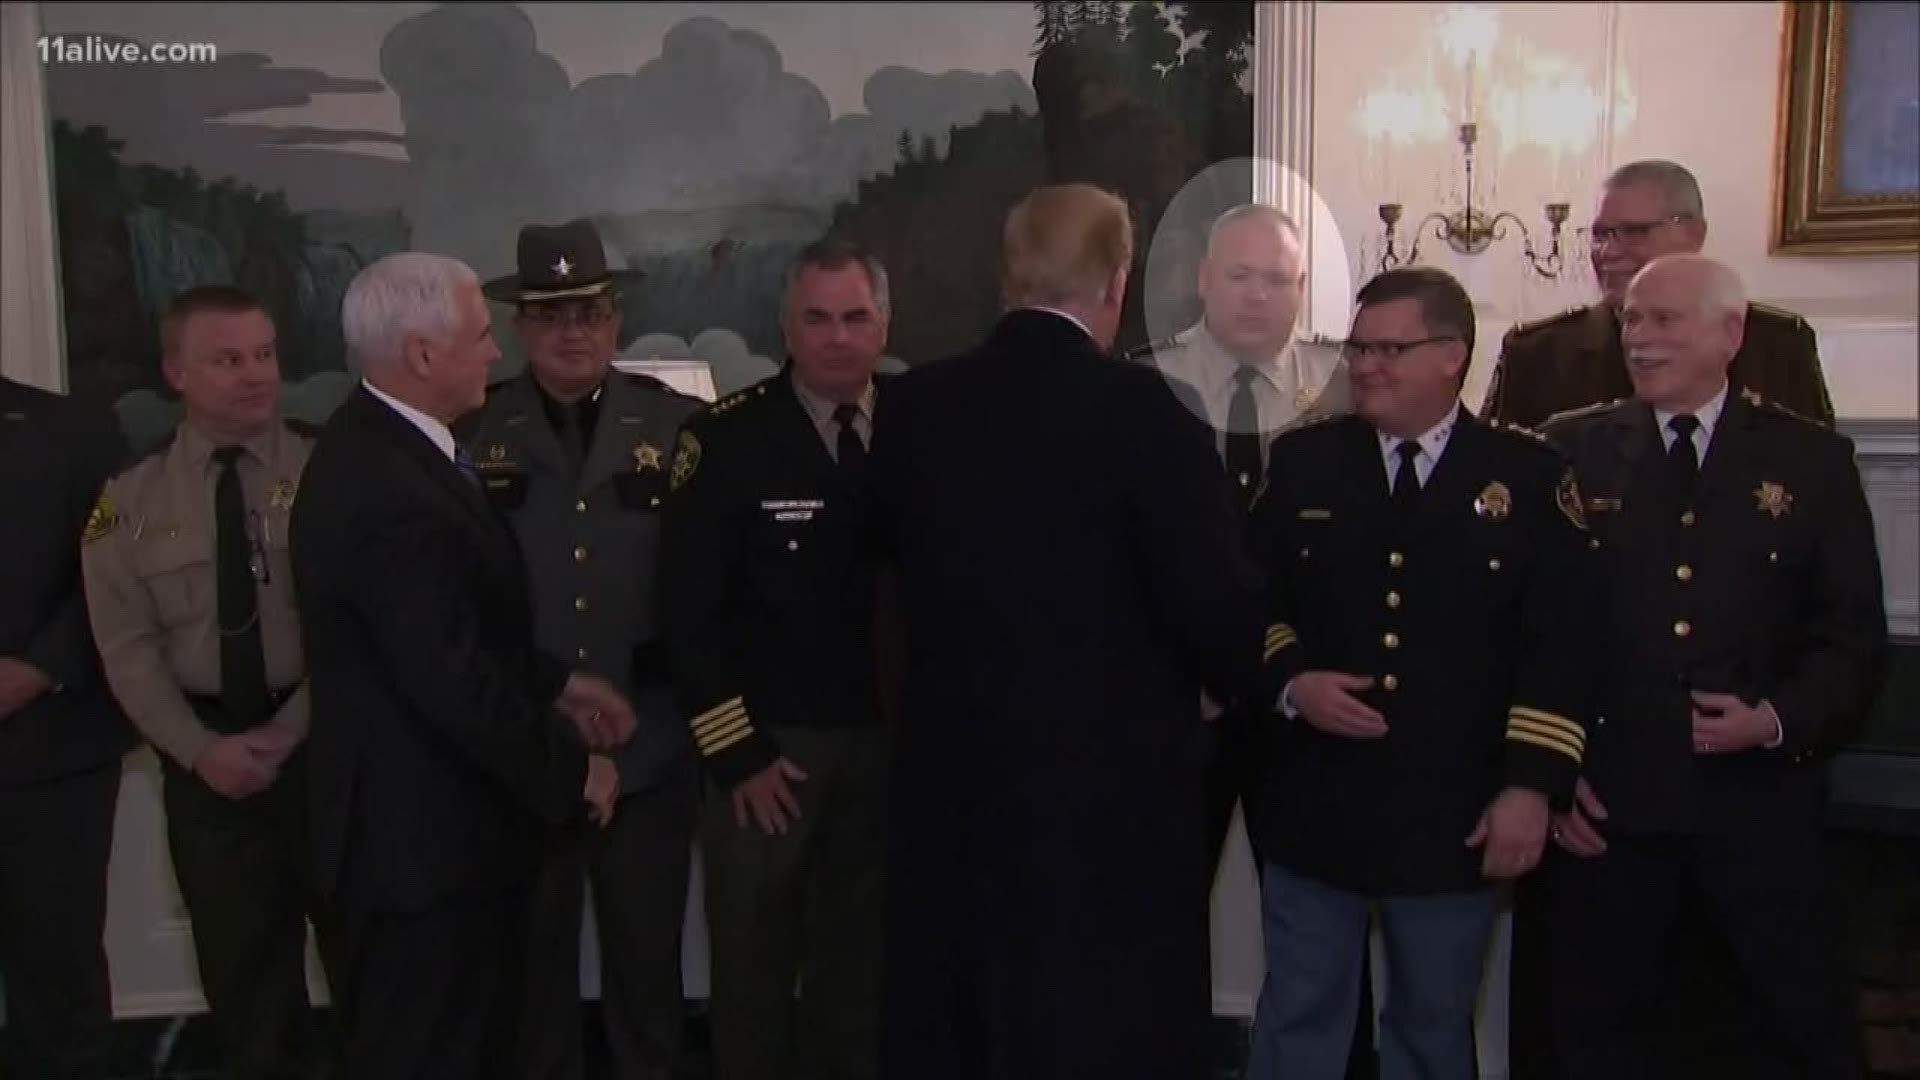 He was one of 20 sheriffs to stand with Trump during comments on Homeland Security and immigration.